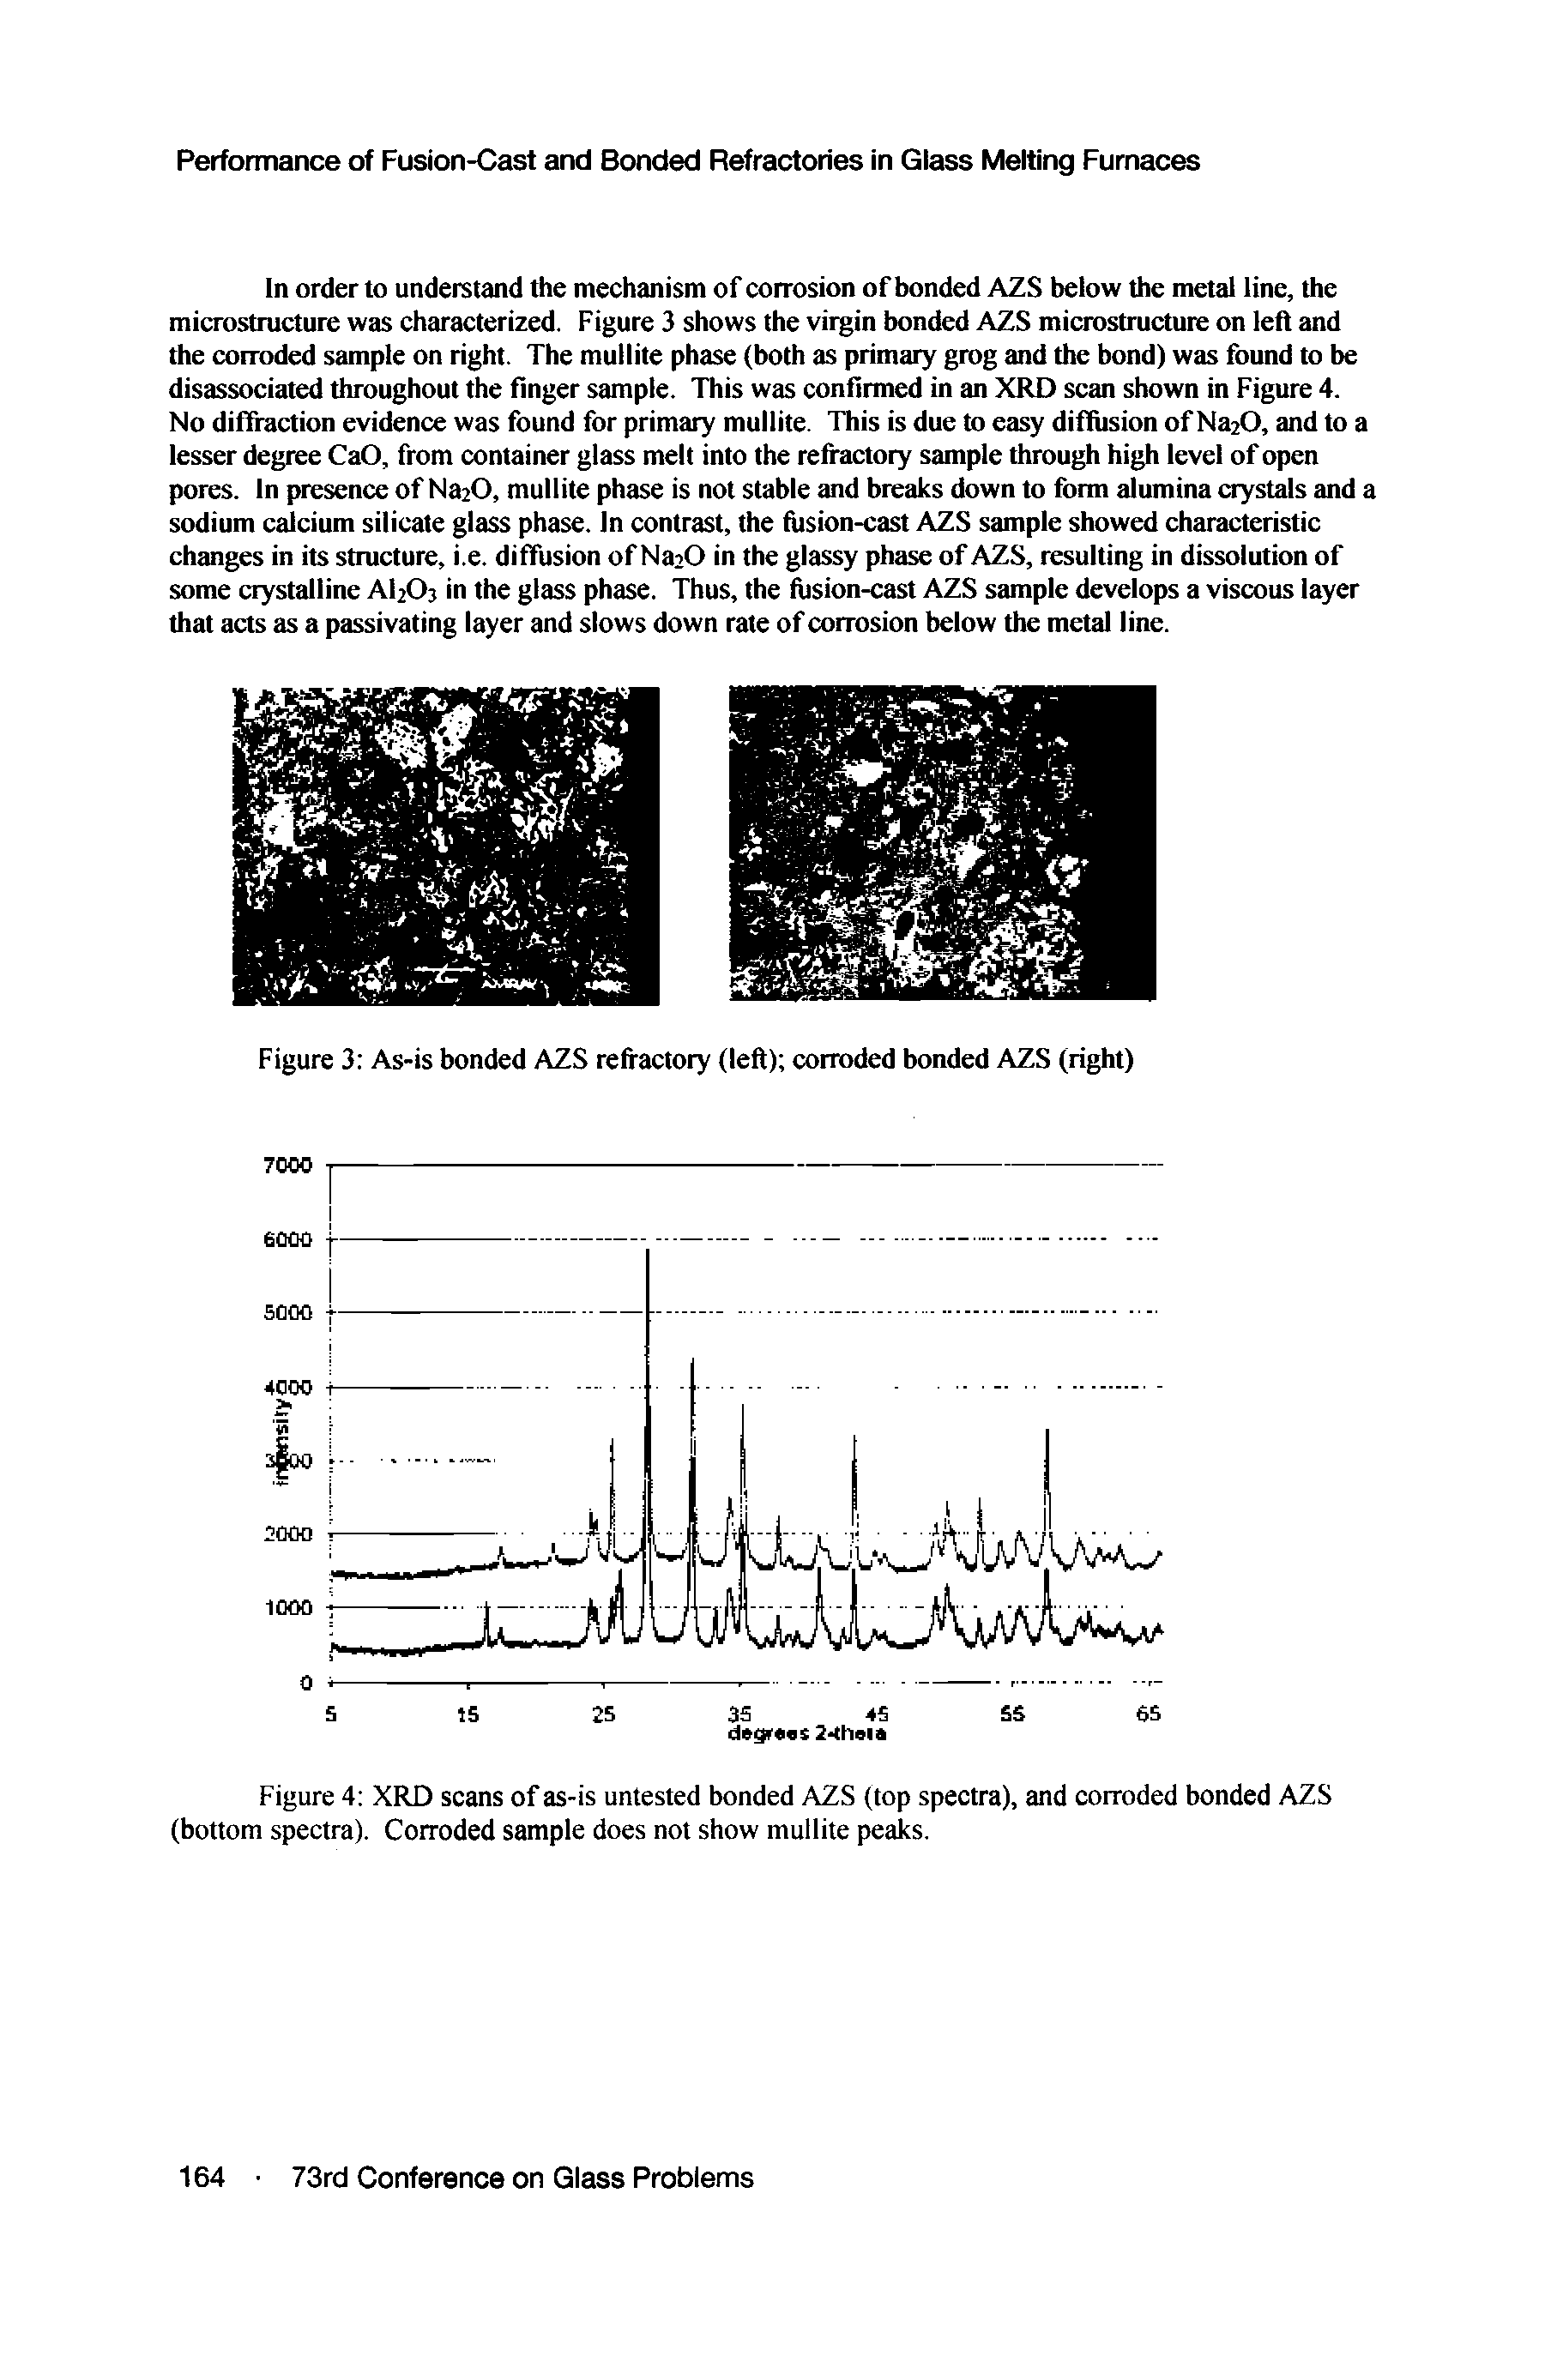 Figure 4 XRD scans of as-is untested bonded AZS (top spectra), and corroded bonded AZS (bottom spectra). Corroded sample does not show mullite peaks.